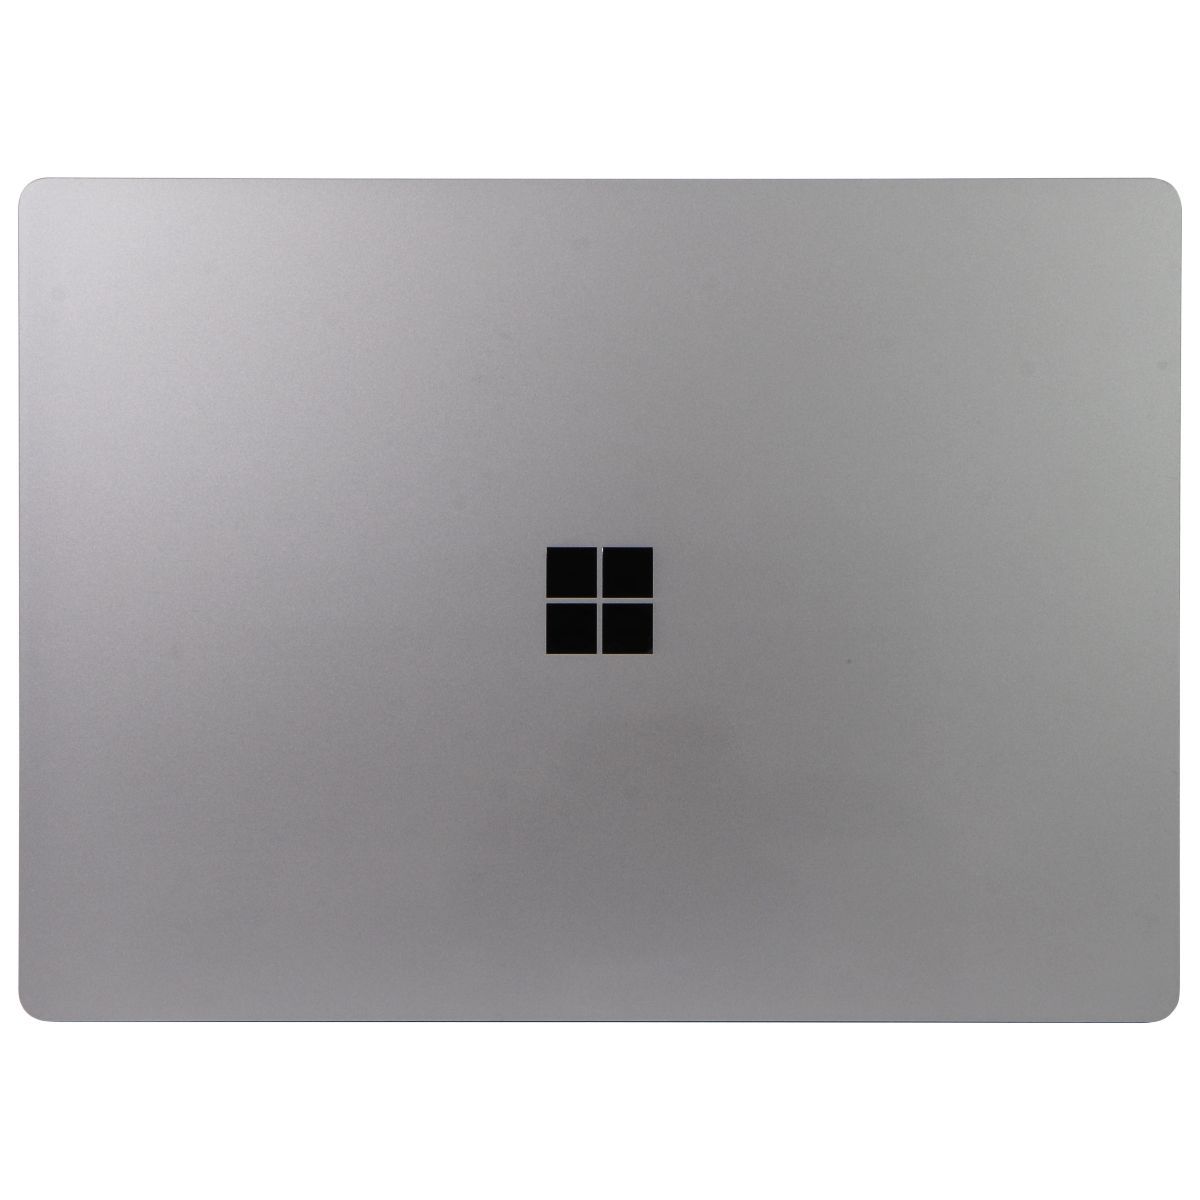 Microsoft Surface Laptop 3 (13.5-in Touch) 1867 (i5-1035/128GB SSD/8GB) Platinum Laptops - PC Laptops & Netbooks Microsoft    - Simple Cell Bulk Wholesale Pricing - USA Seller